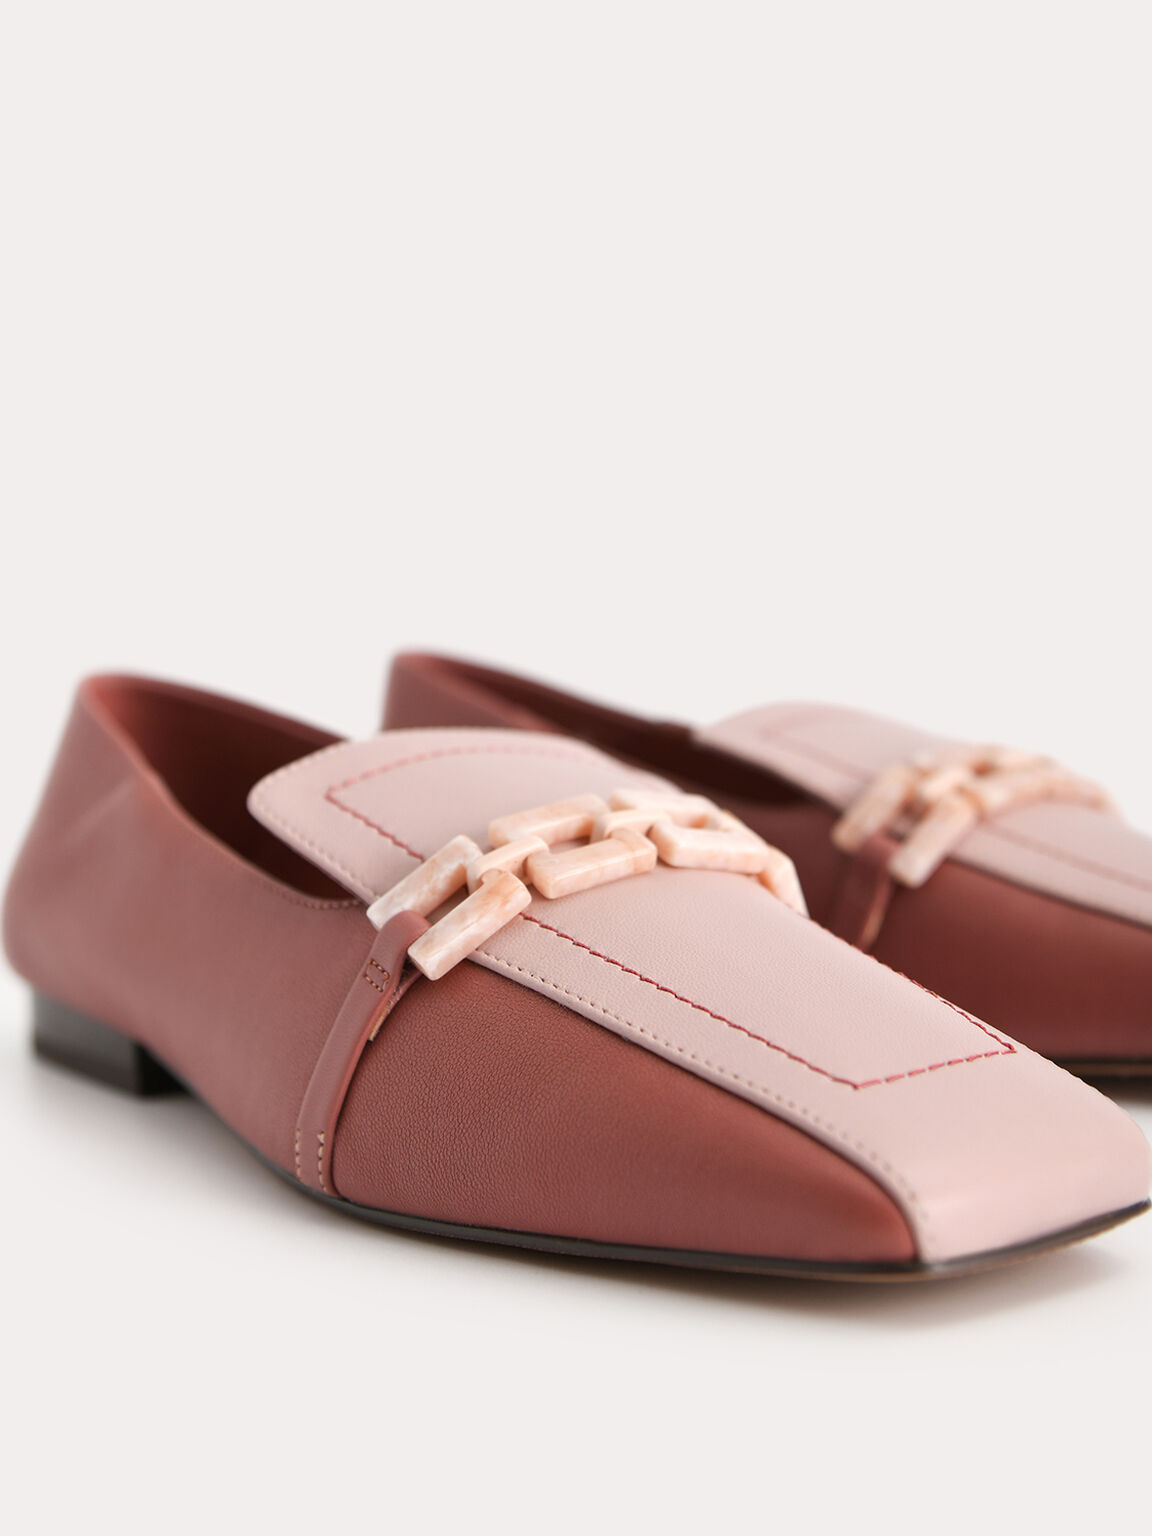 Leather Square Toe Loafers, Walnut, hi-res